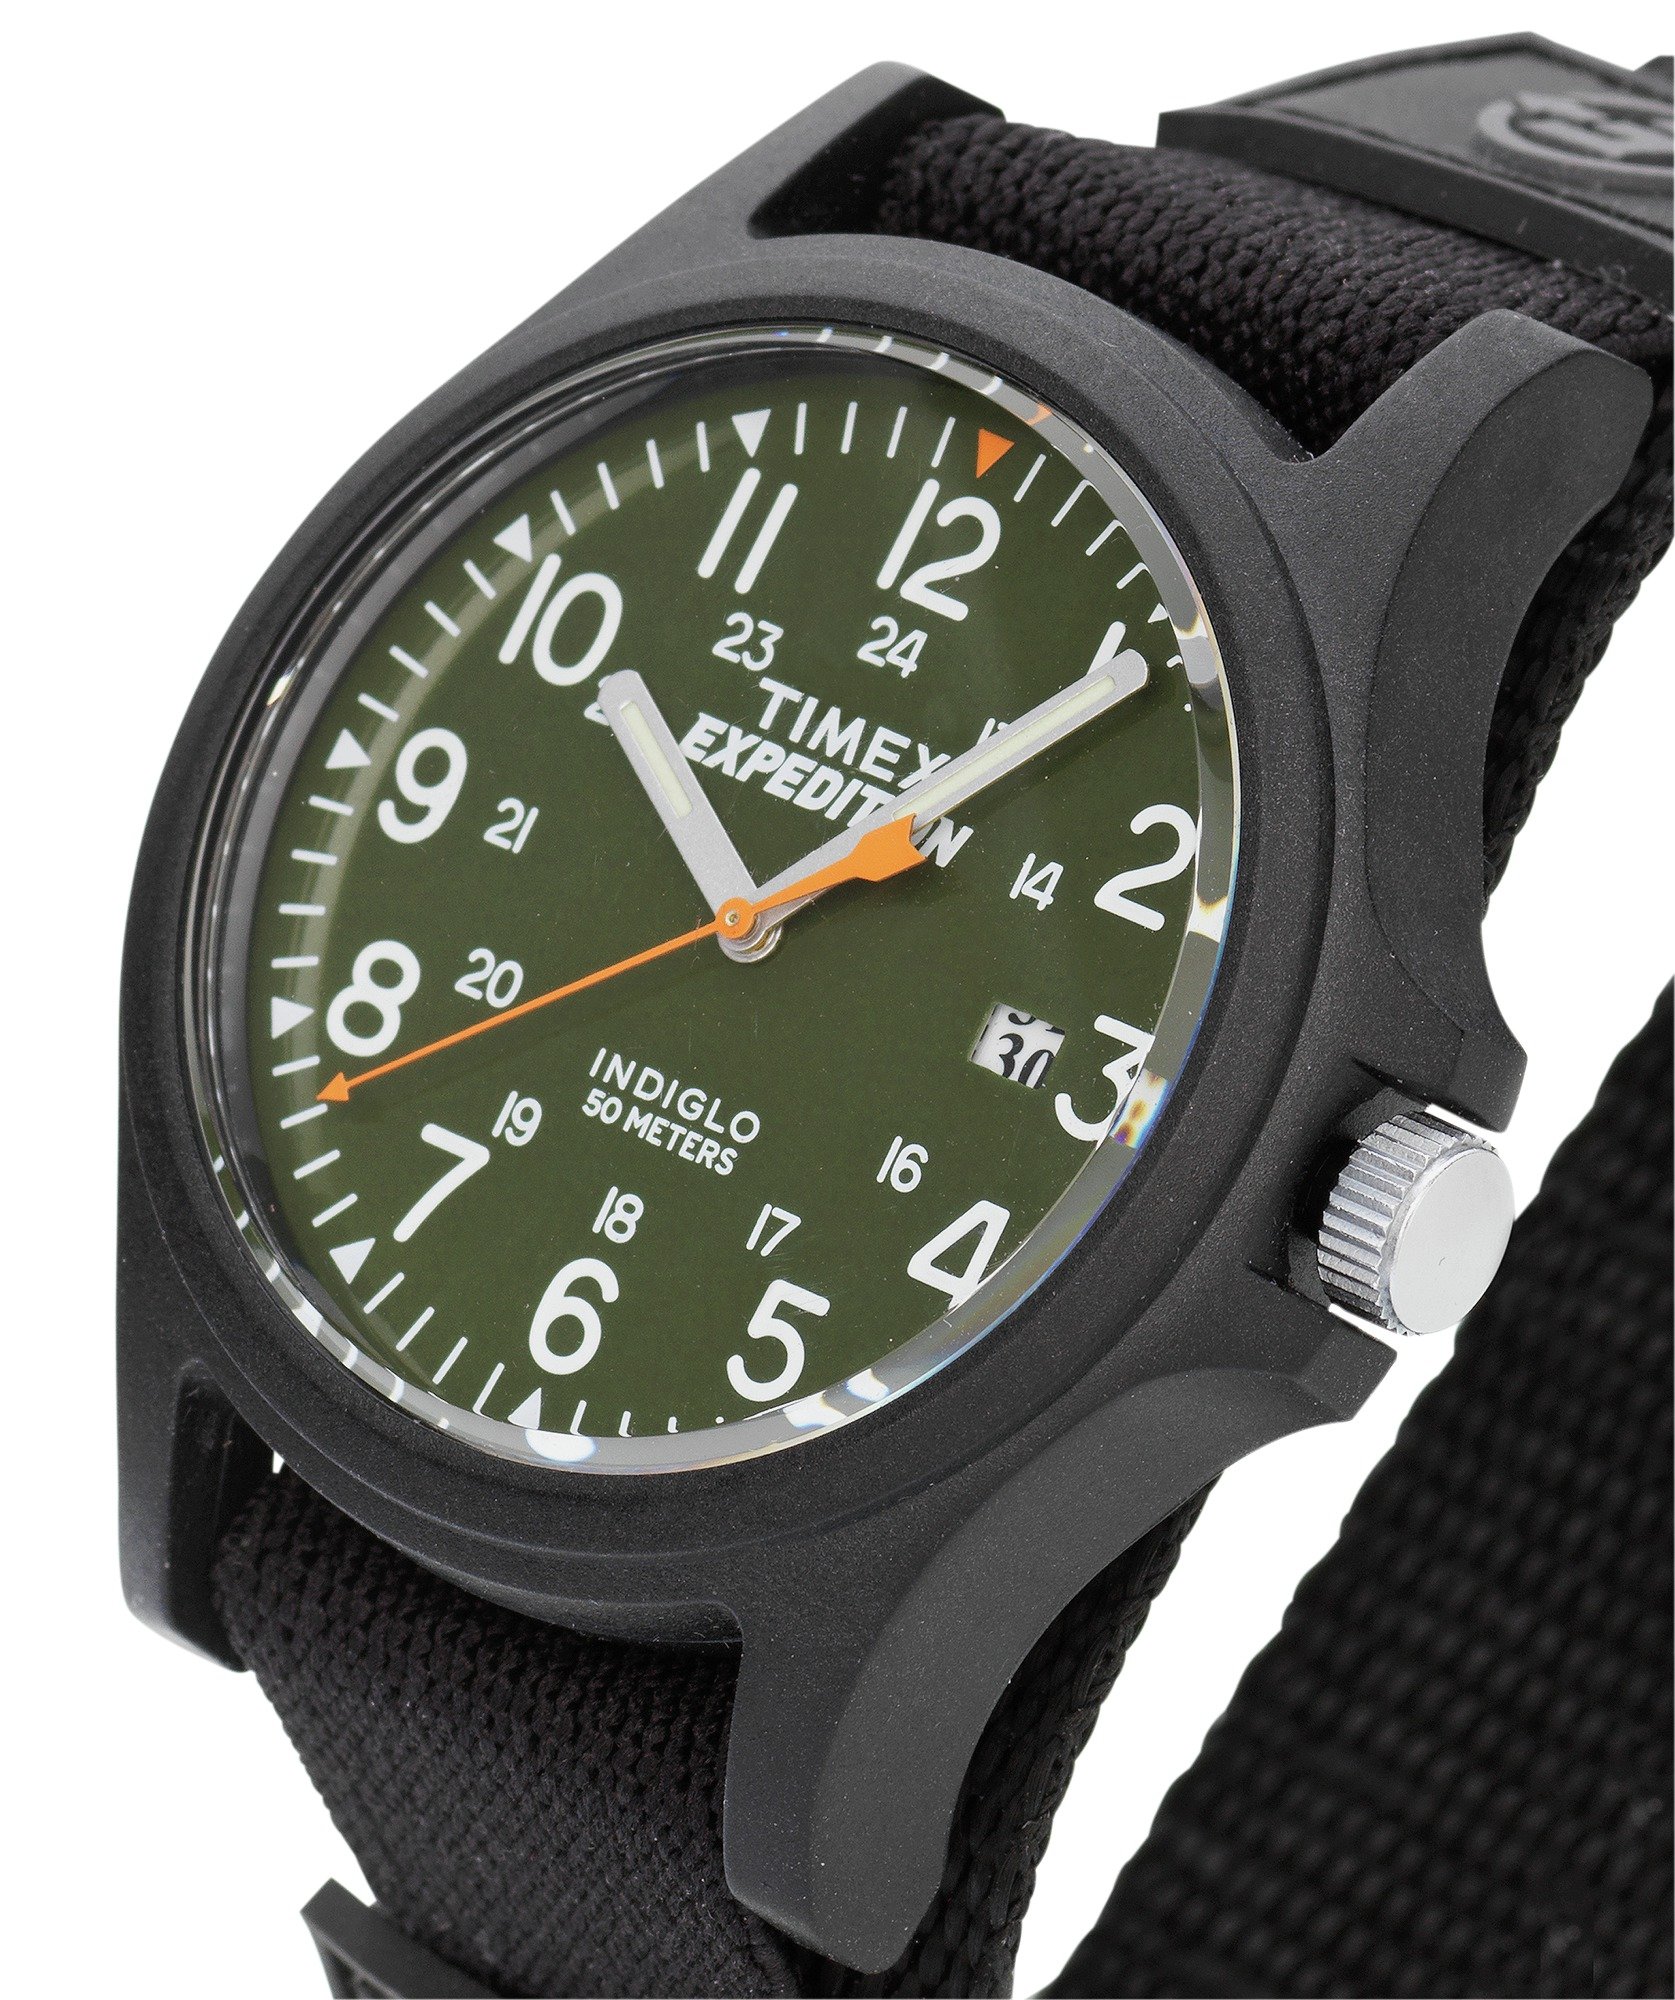 Timex Men's  Black Fabric Strap Watch Review